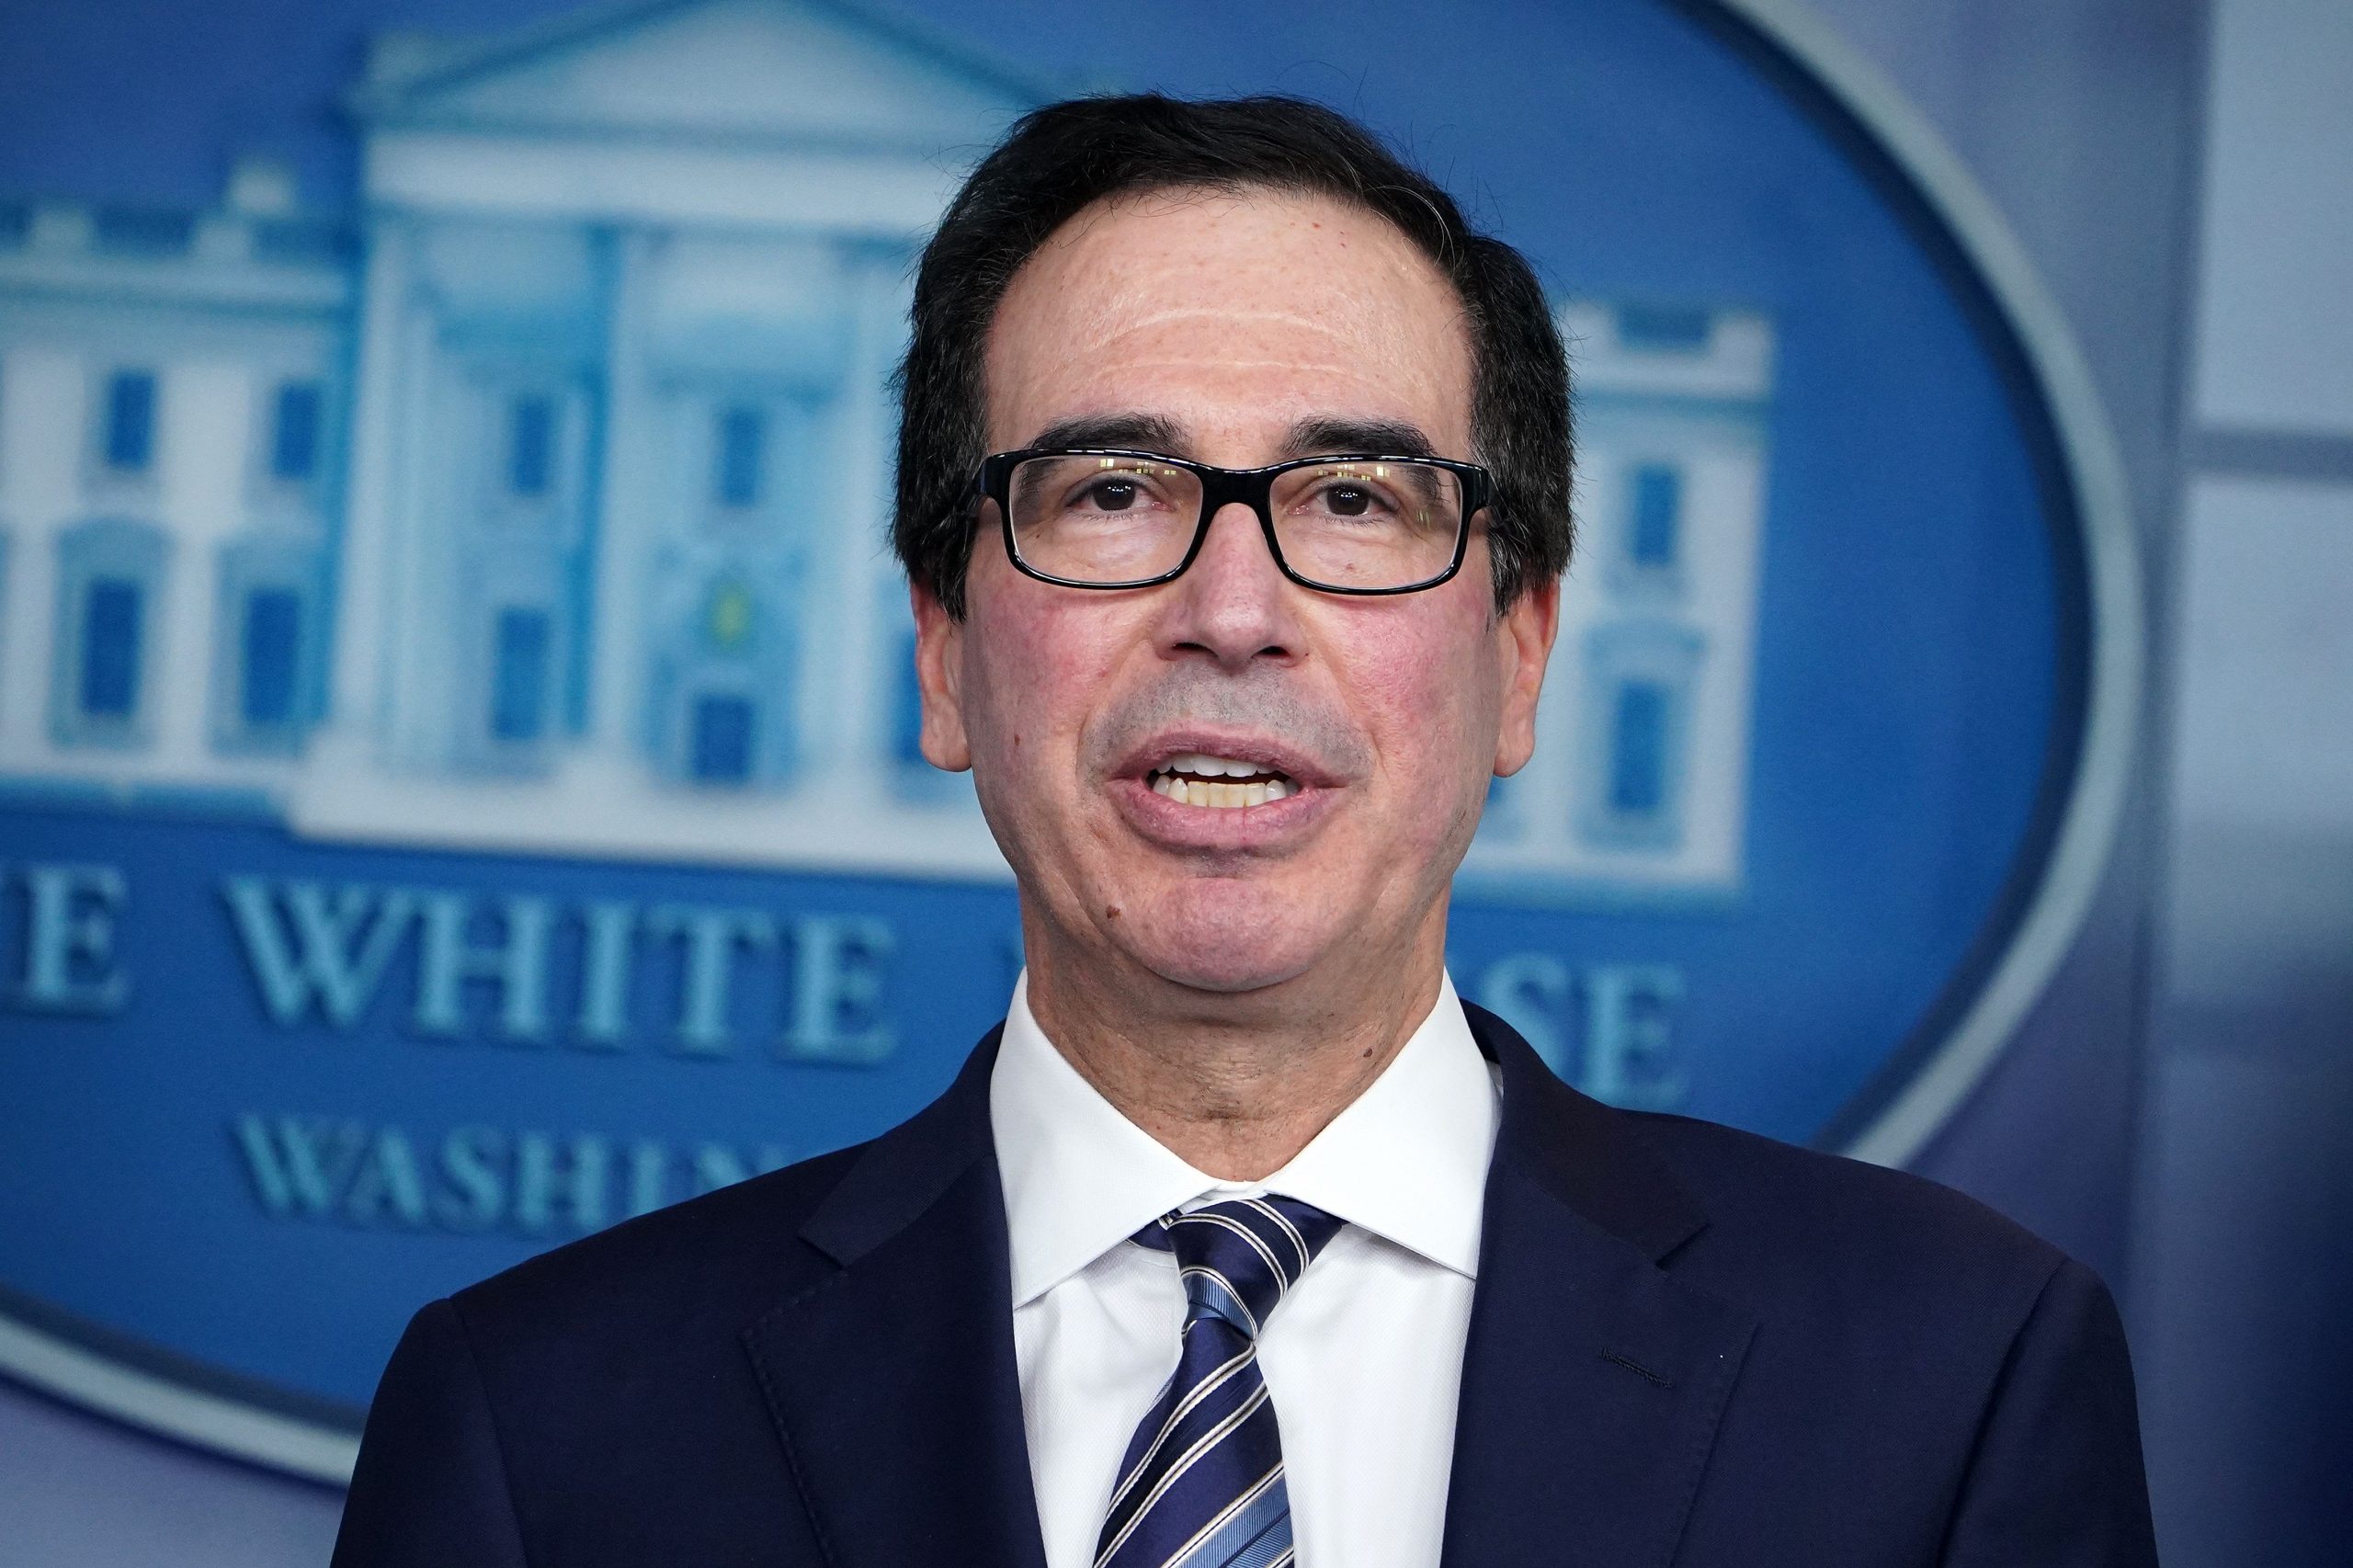 Mnuchin: SBA to Review PPP Loans Over $2M - RRBB Accountants and Advisors, New Jersey, NJ ...